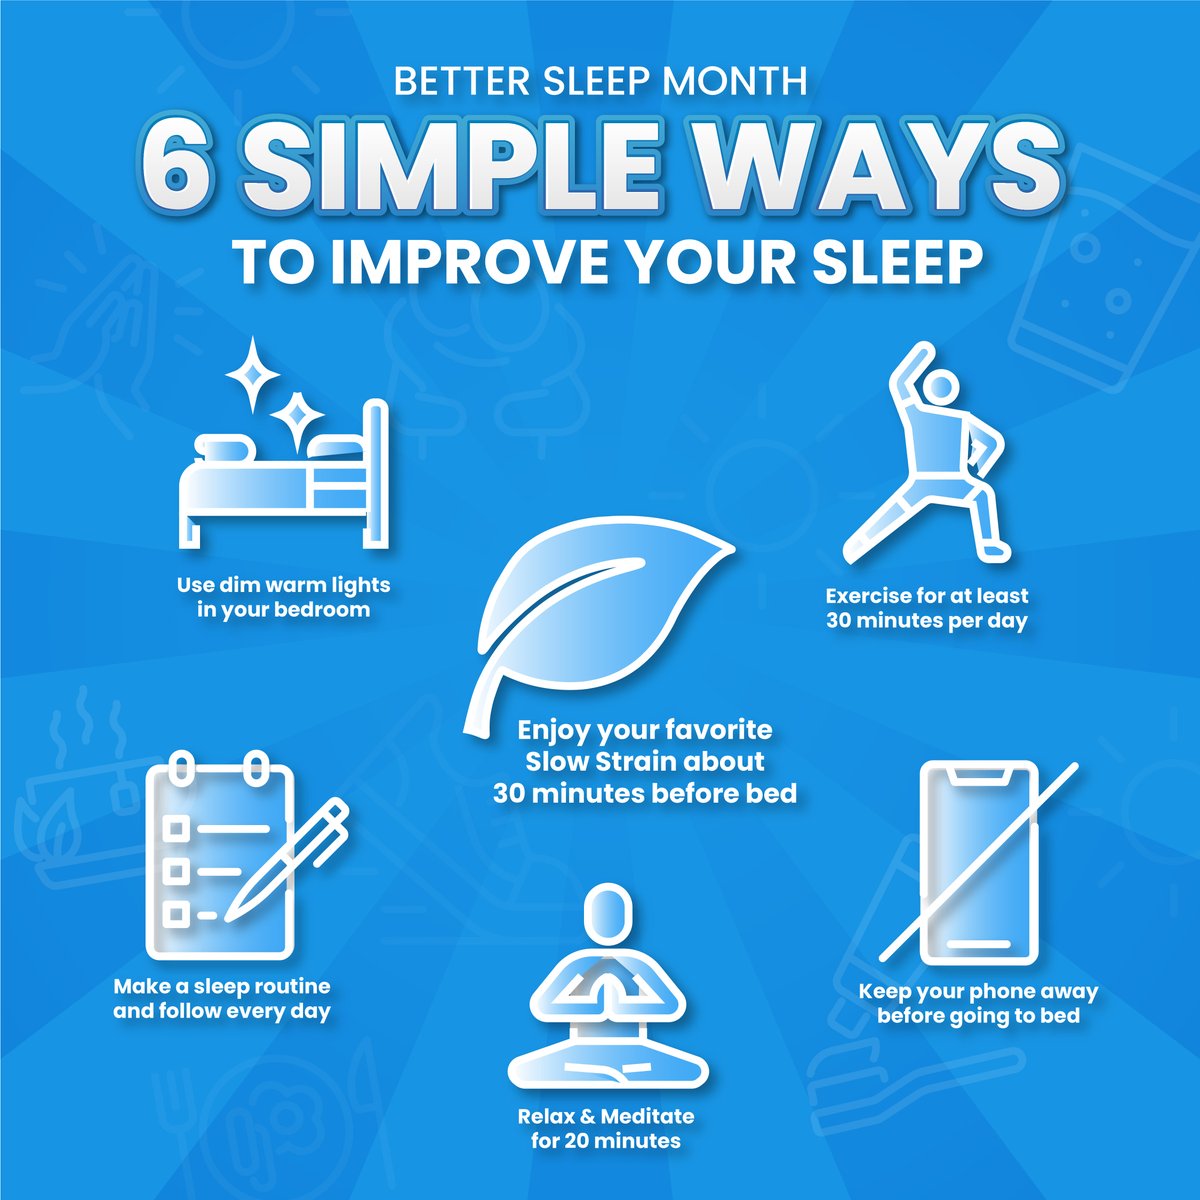 Want to improve your sleep quality 💤

Try these tips and sweet dreams to you all!

bit.ly/3Gd1mn1

#SleepBetter #RestWell